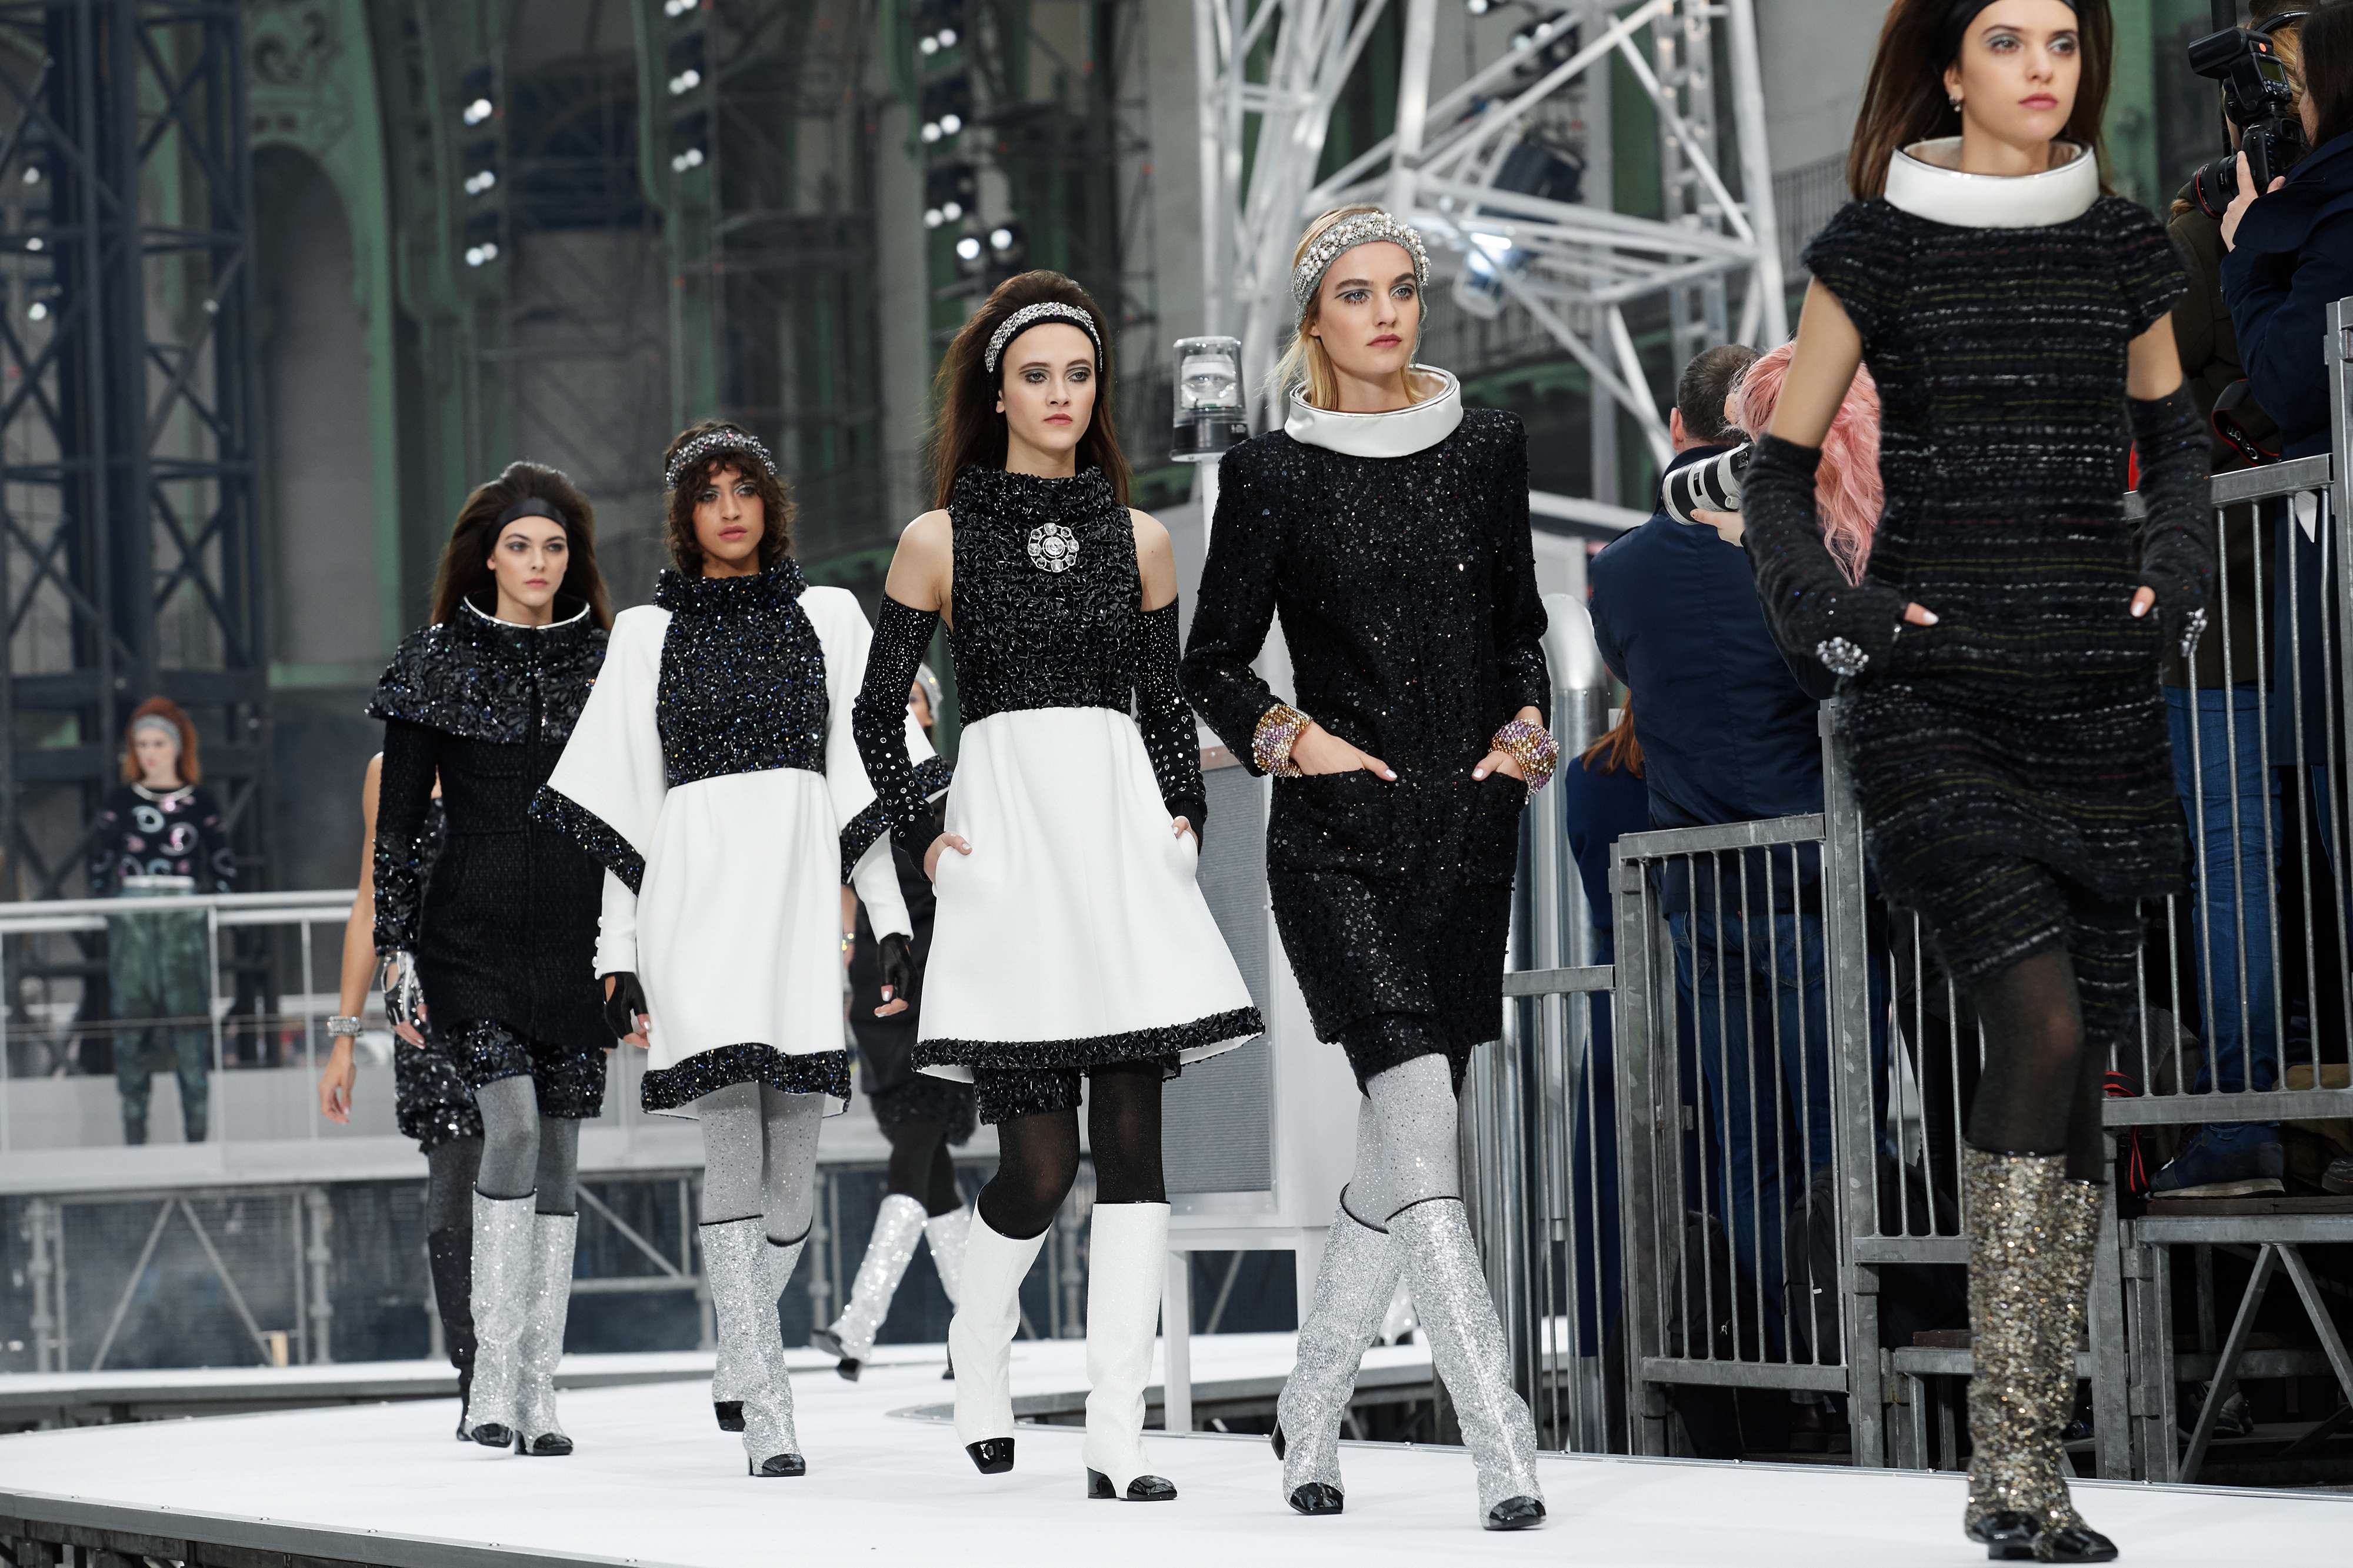 Chanel's autumn-winter 2017 collection at Paris Fashion Week